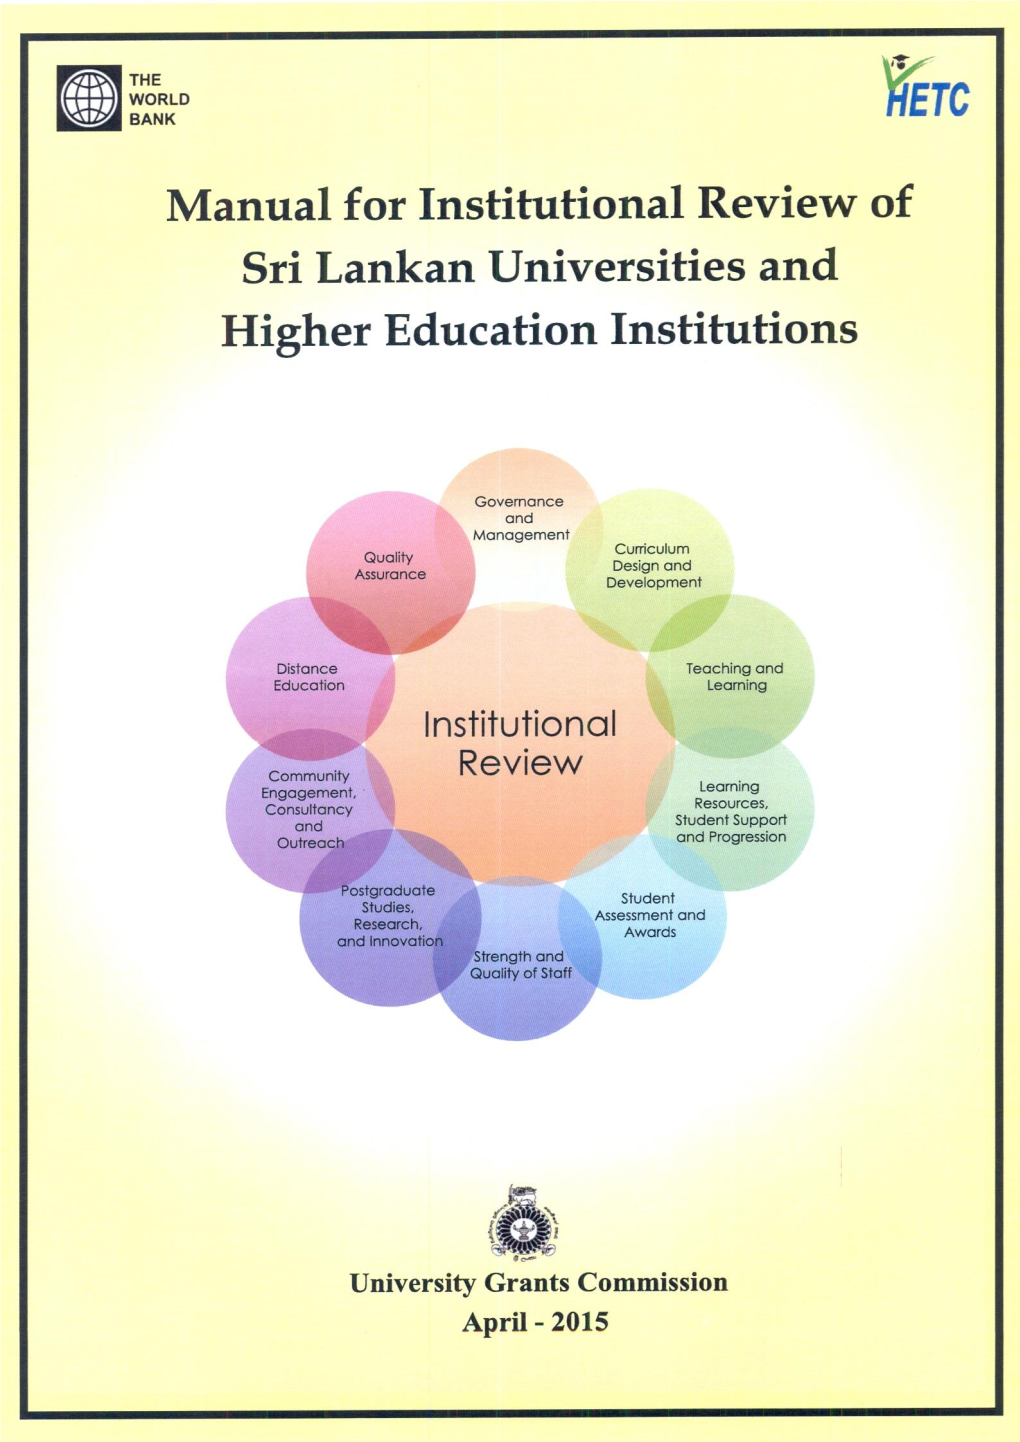 Manual for Institutional Review of Sri Lankan Universities and Higher Education Institutions